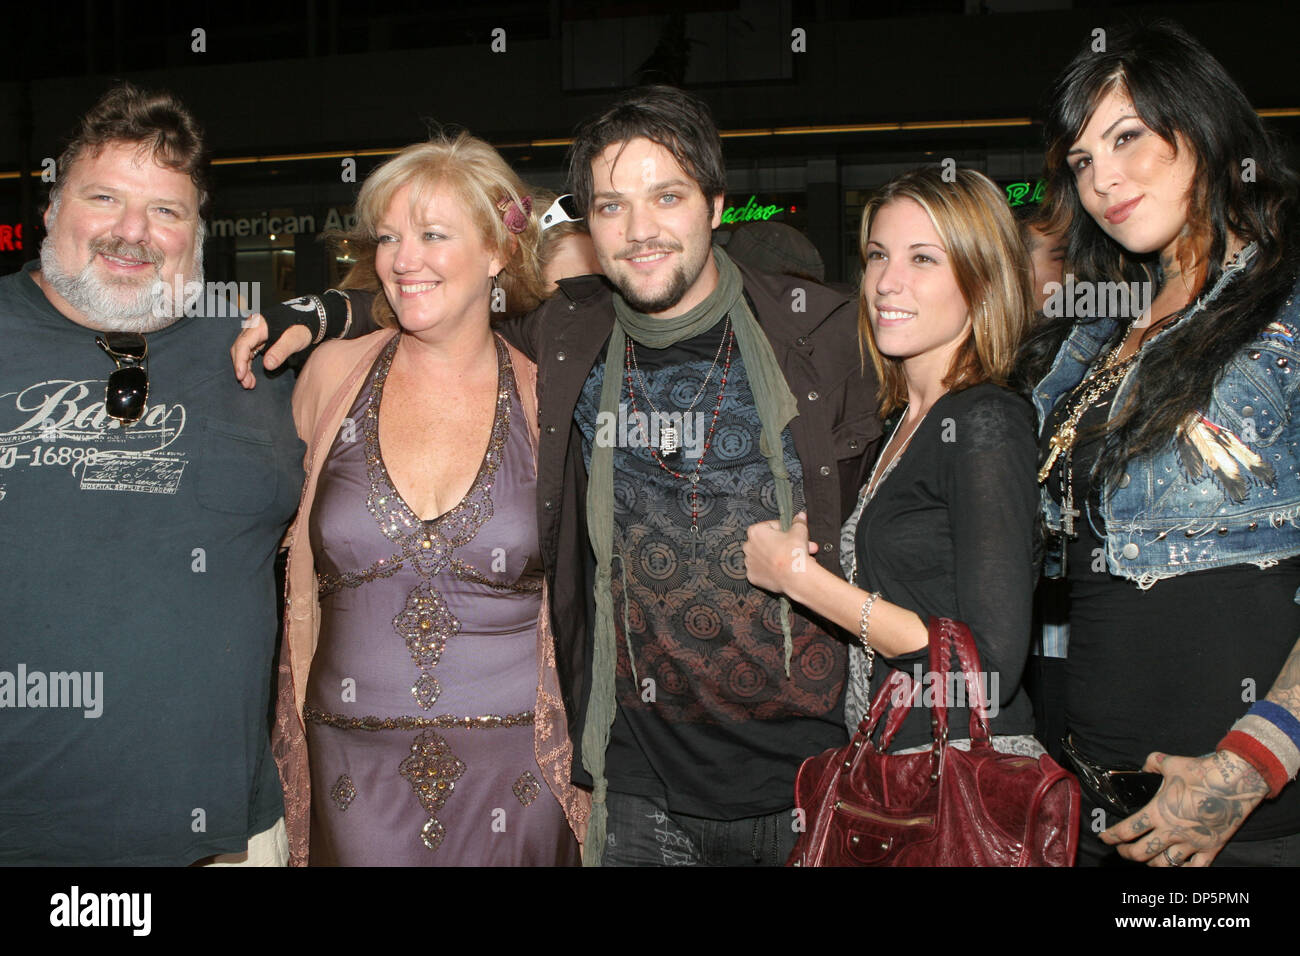 Sep 21, 2006; Hollywood, CA, USA; Actor and one of the stars of the BAM MARGERA arrives with his parents and tattoo artist KAT VON D (far right) for the Jackass